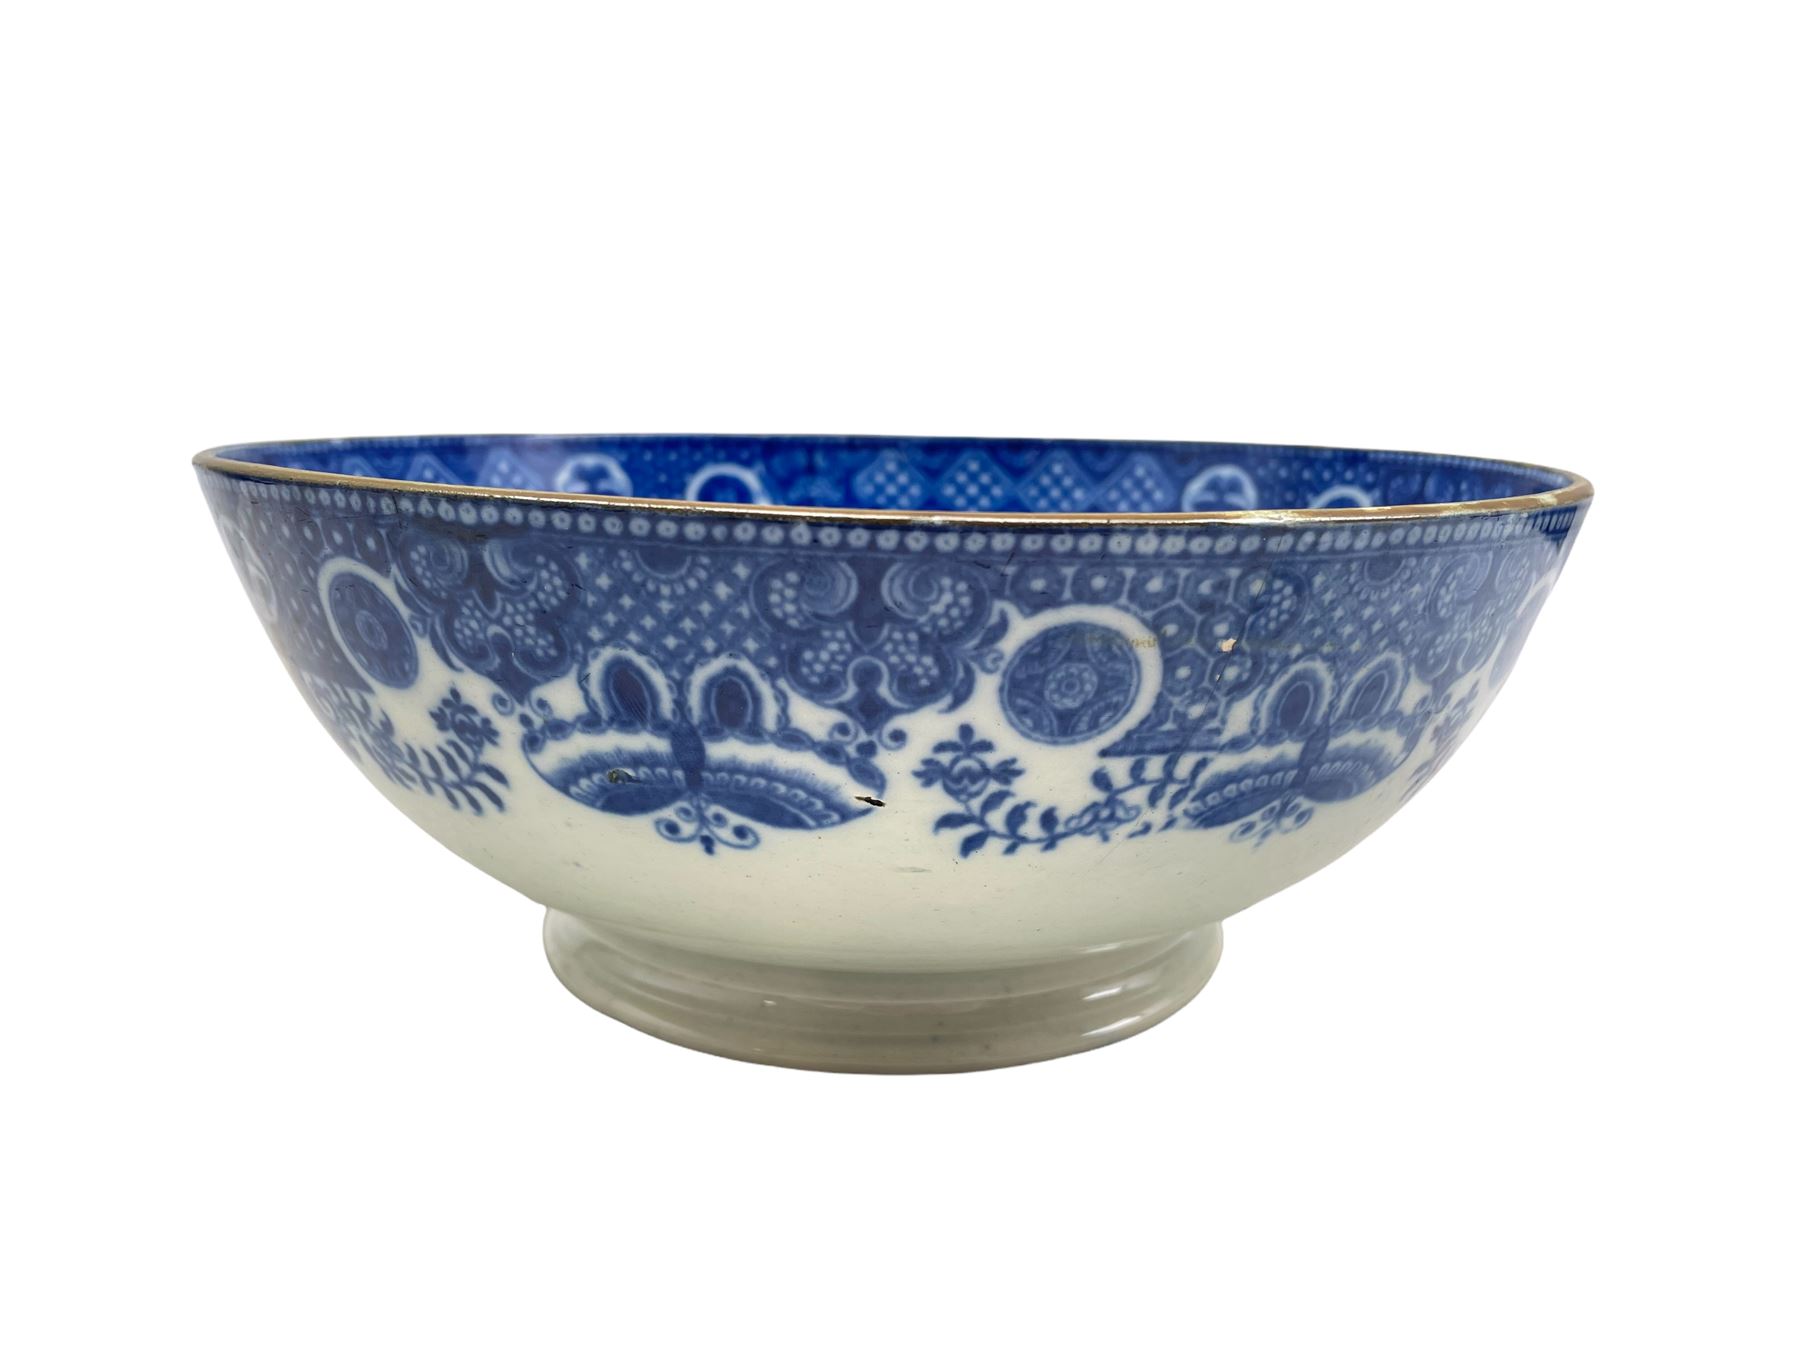 Early 19th century bowl printed in blue with a portrait of Nelson - Image 2 of 2